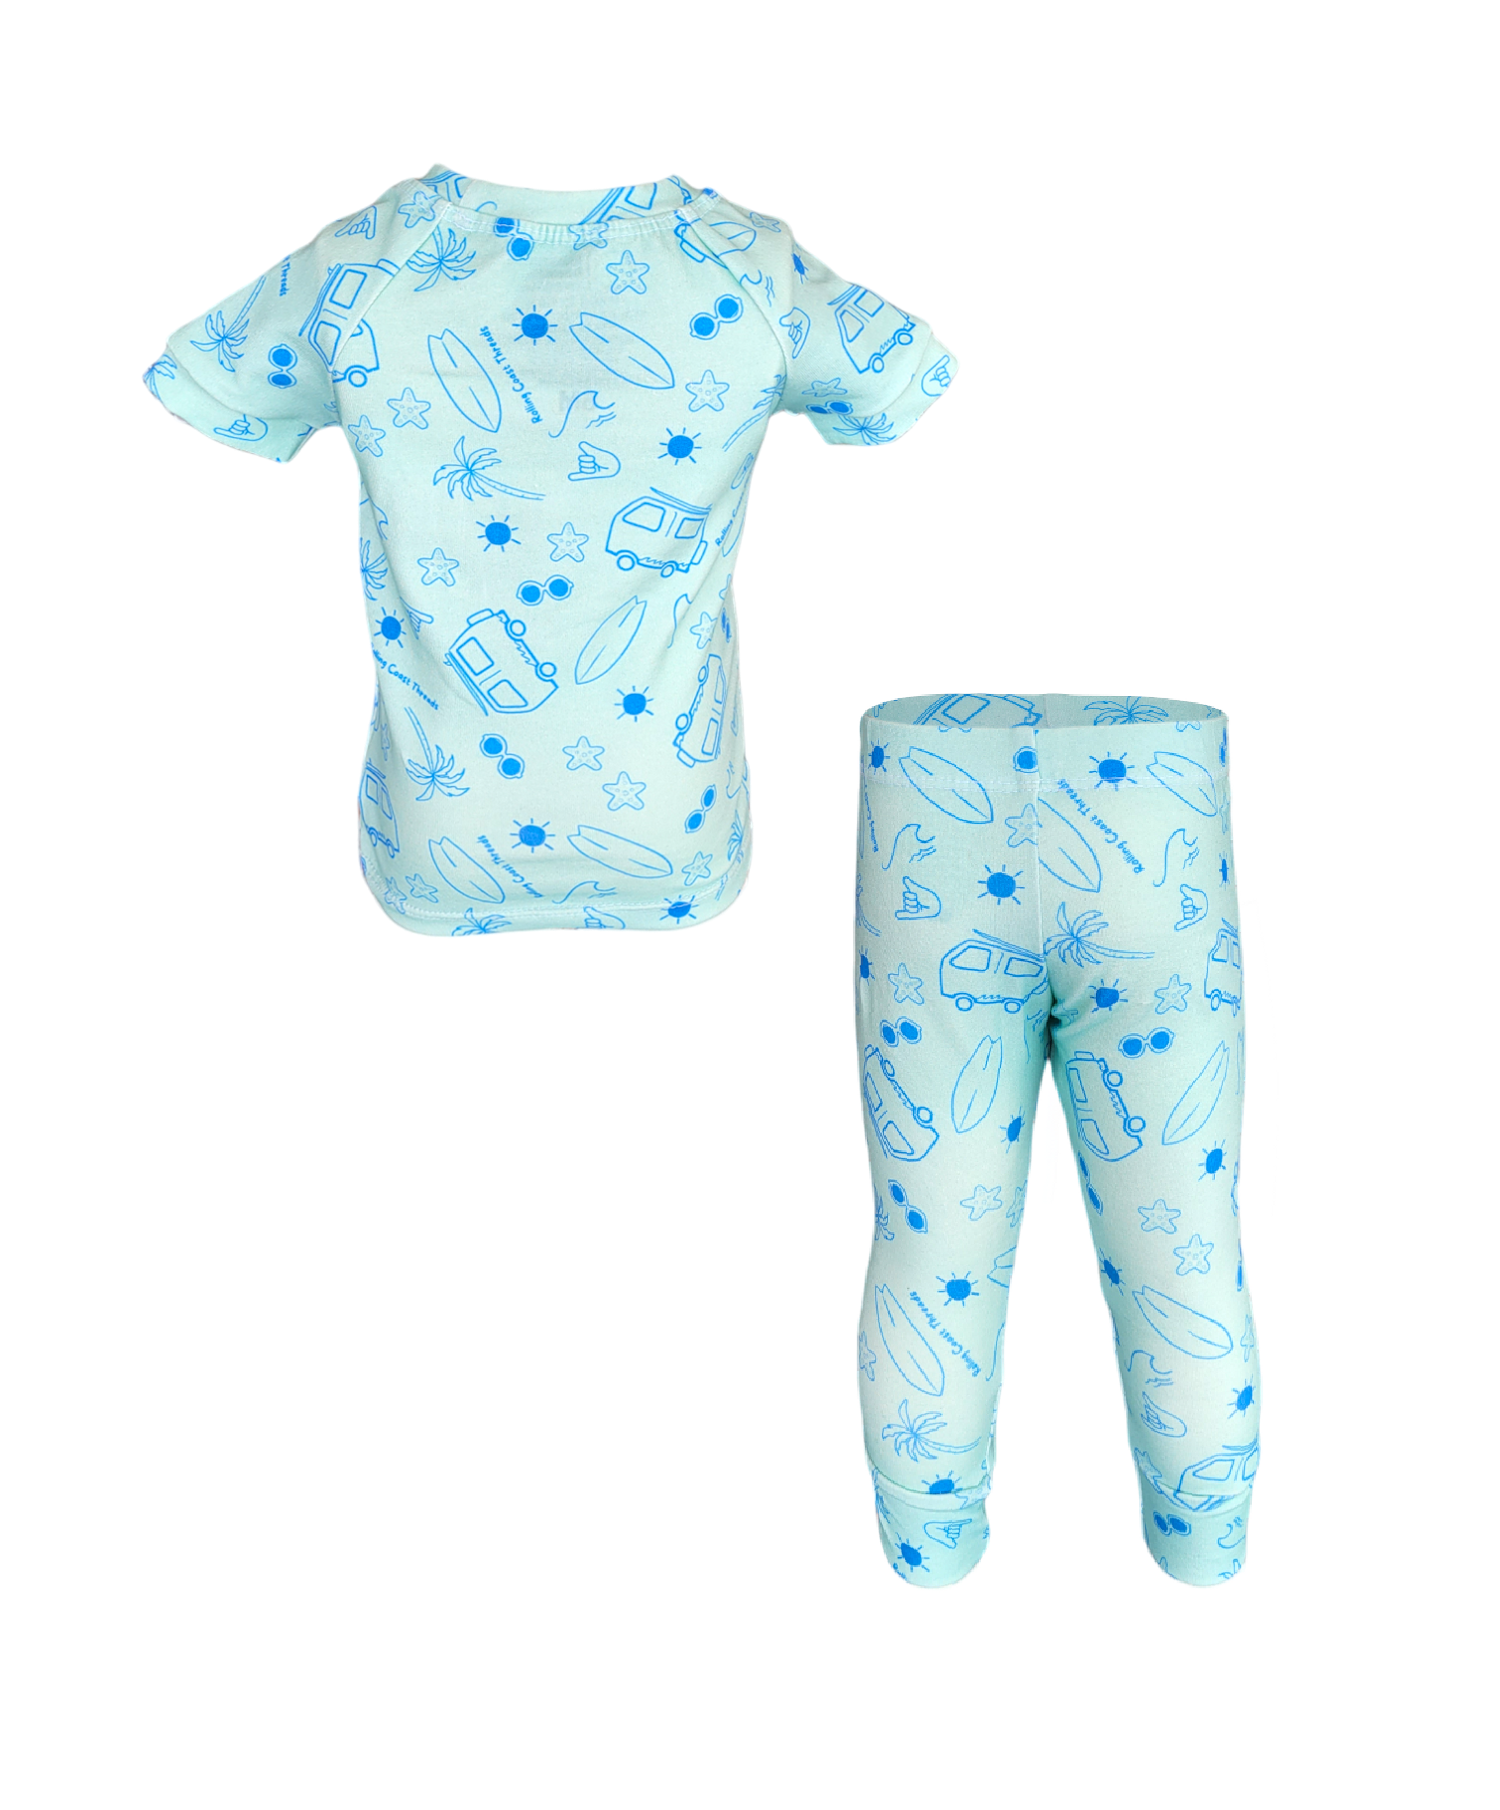 Back of Summer Lovin' Pajama Set. Organic teal short sleeve and pant set with blue beach elements.